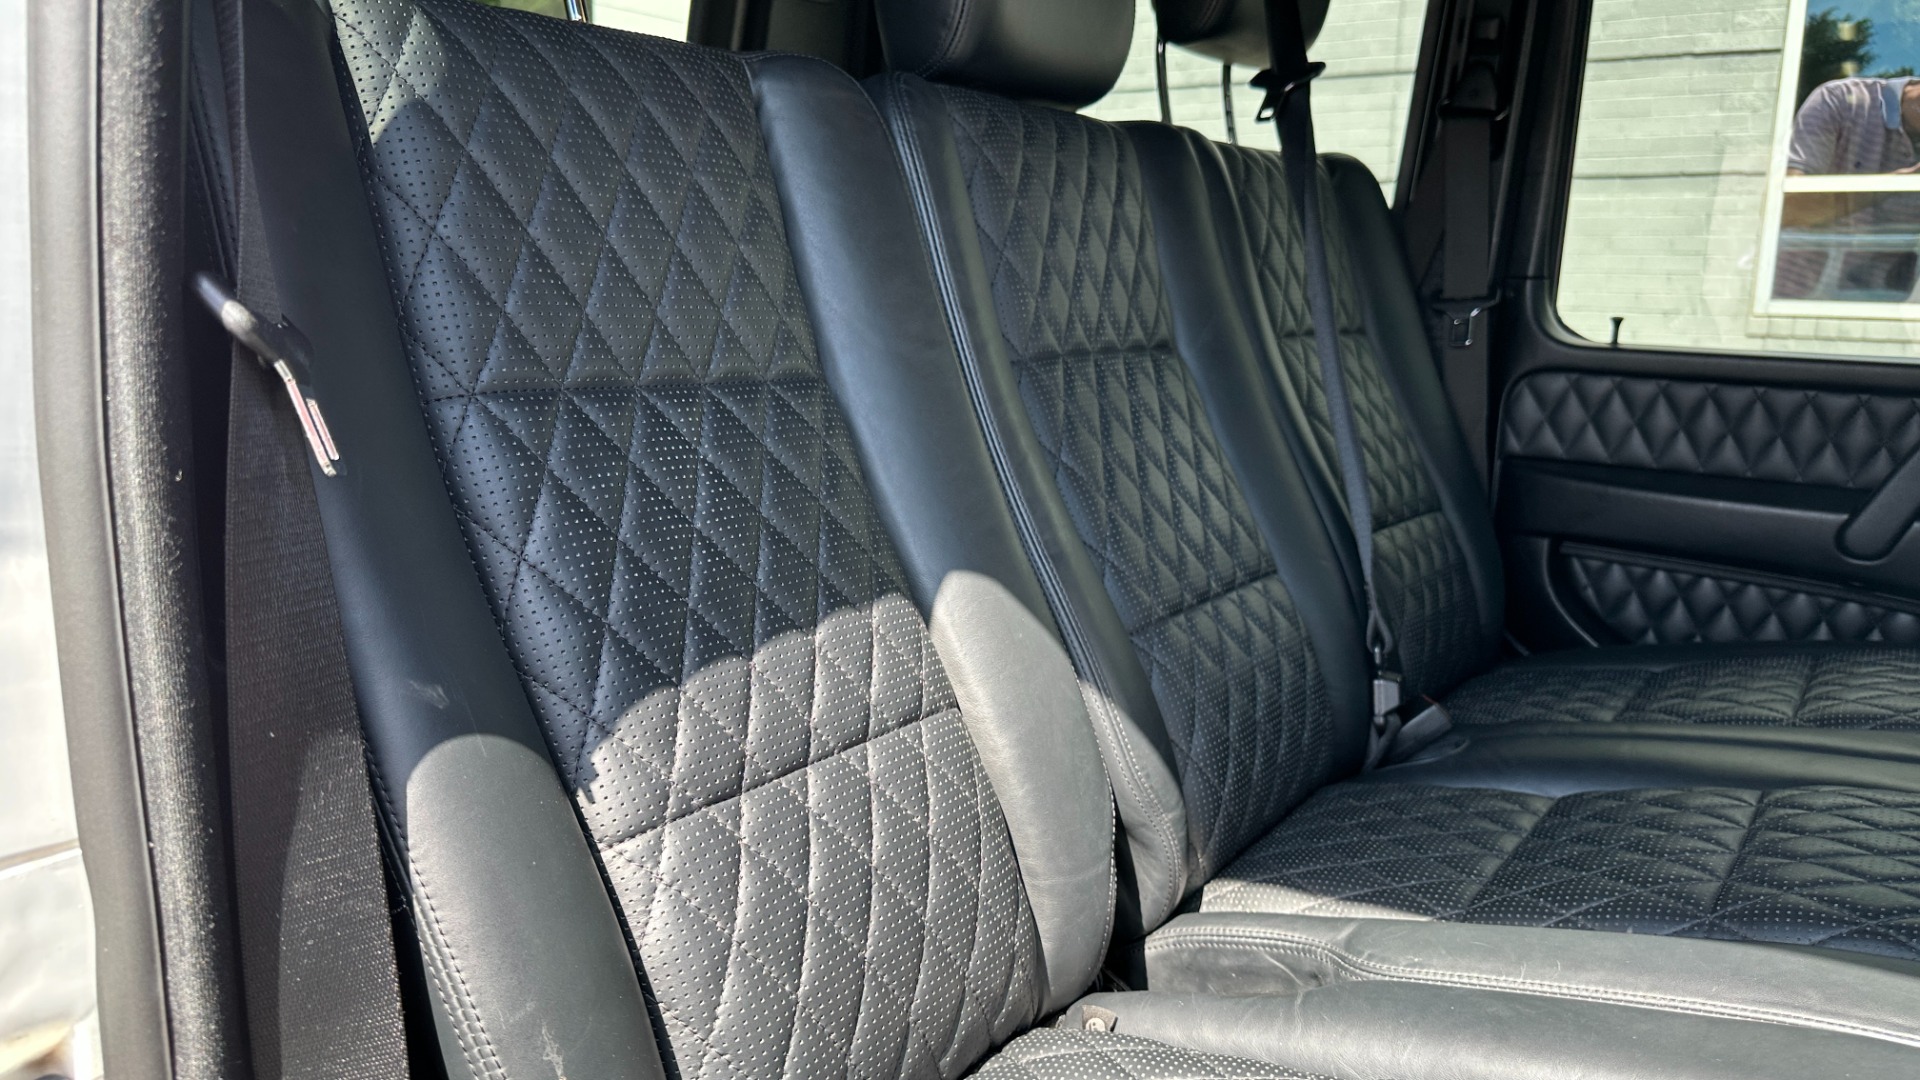 Used 2014 Mercedes-Benz G-Class G 63 AMG / DESIGNO LEATHER / DIAMOND STITCH / SPORTS SEATS / PA6 PKG for sale $67,995 at Formula Imports in Charlotte NC 28227 29